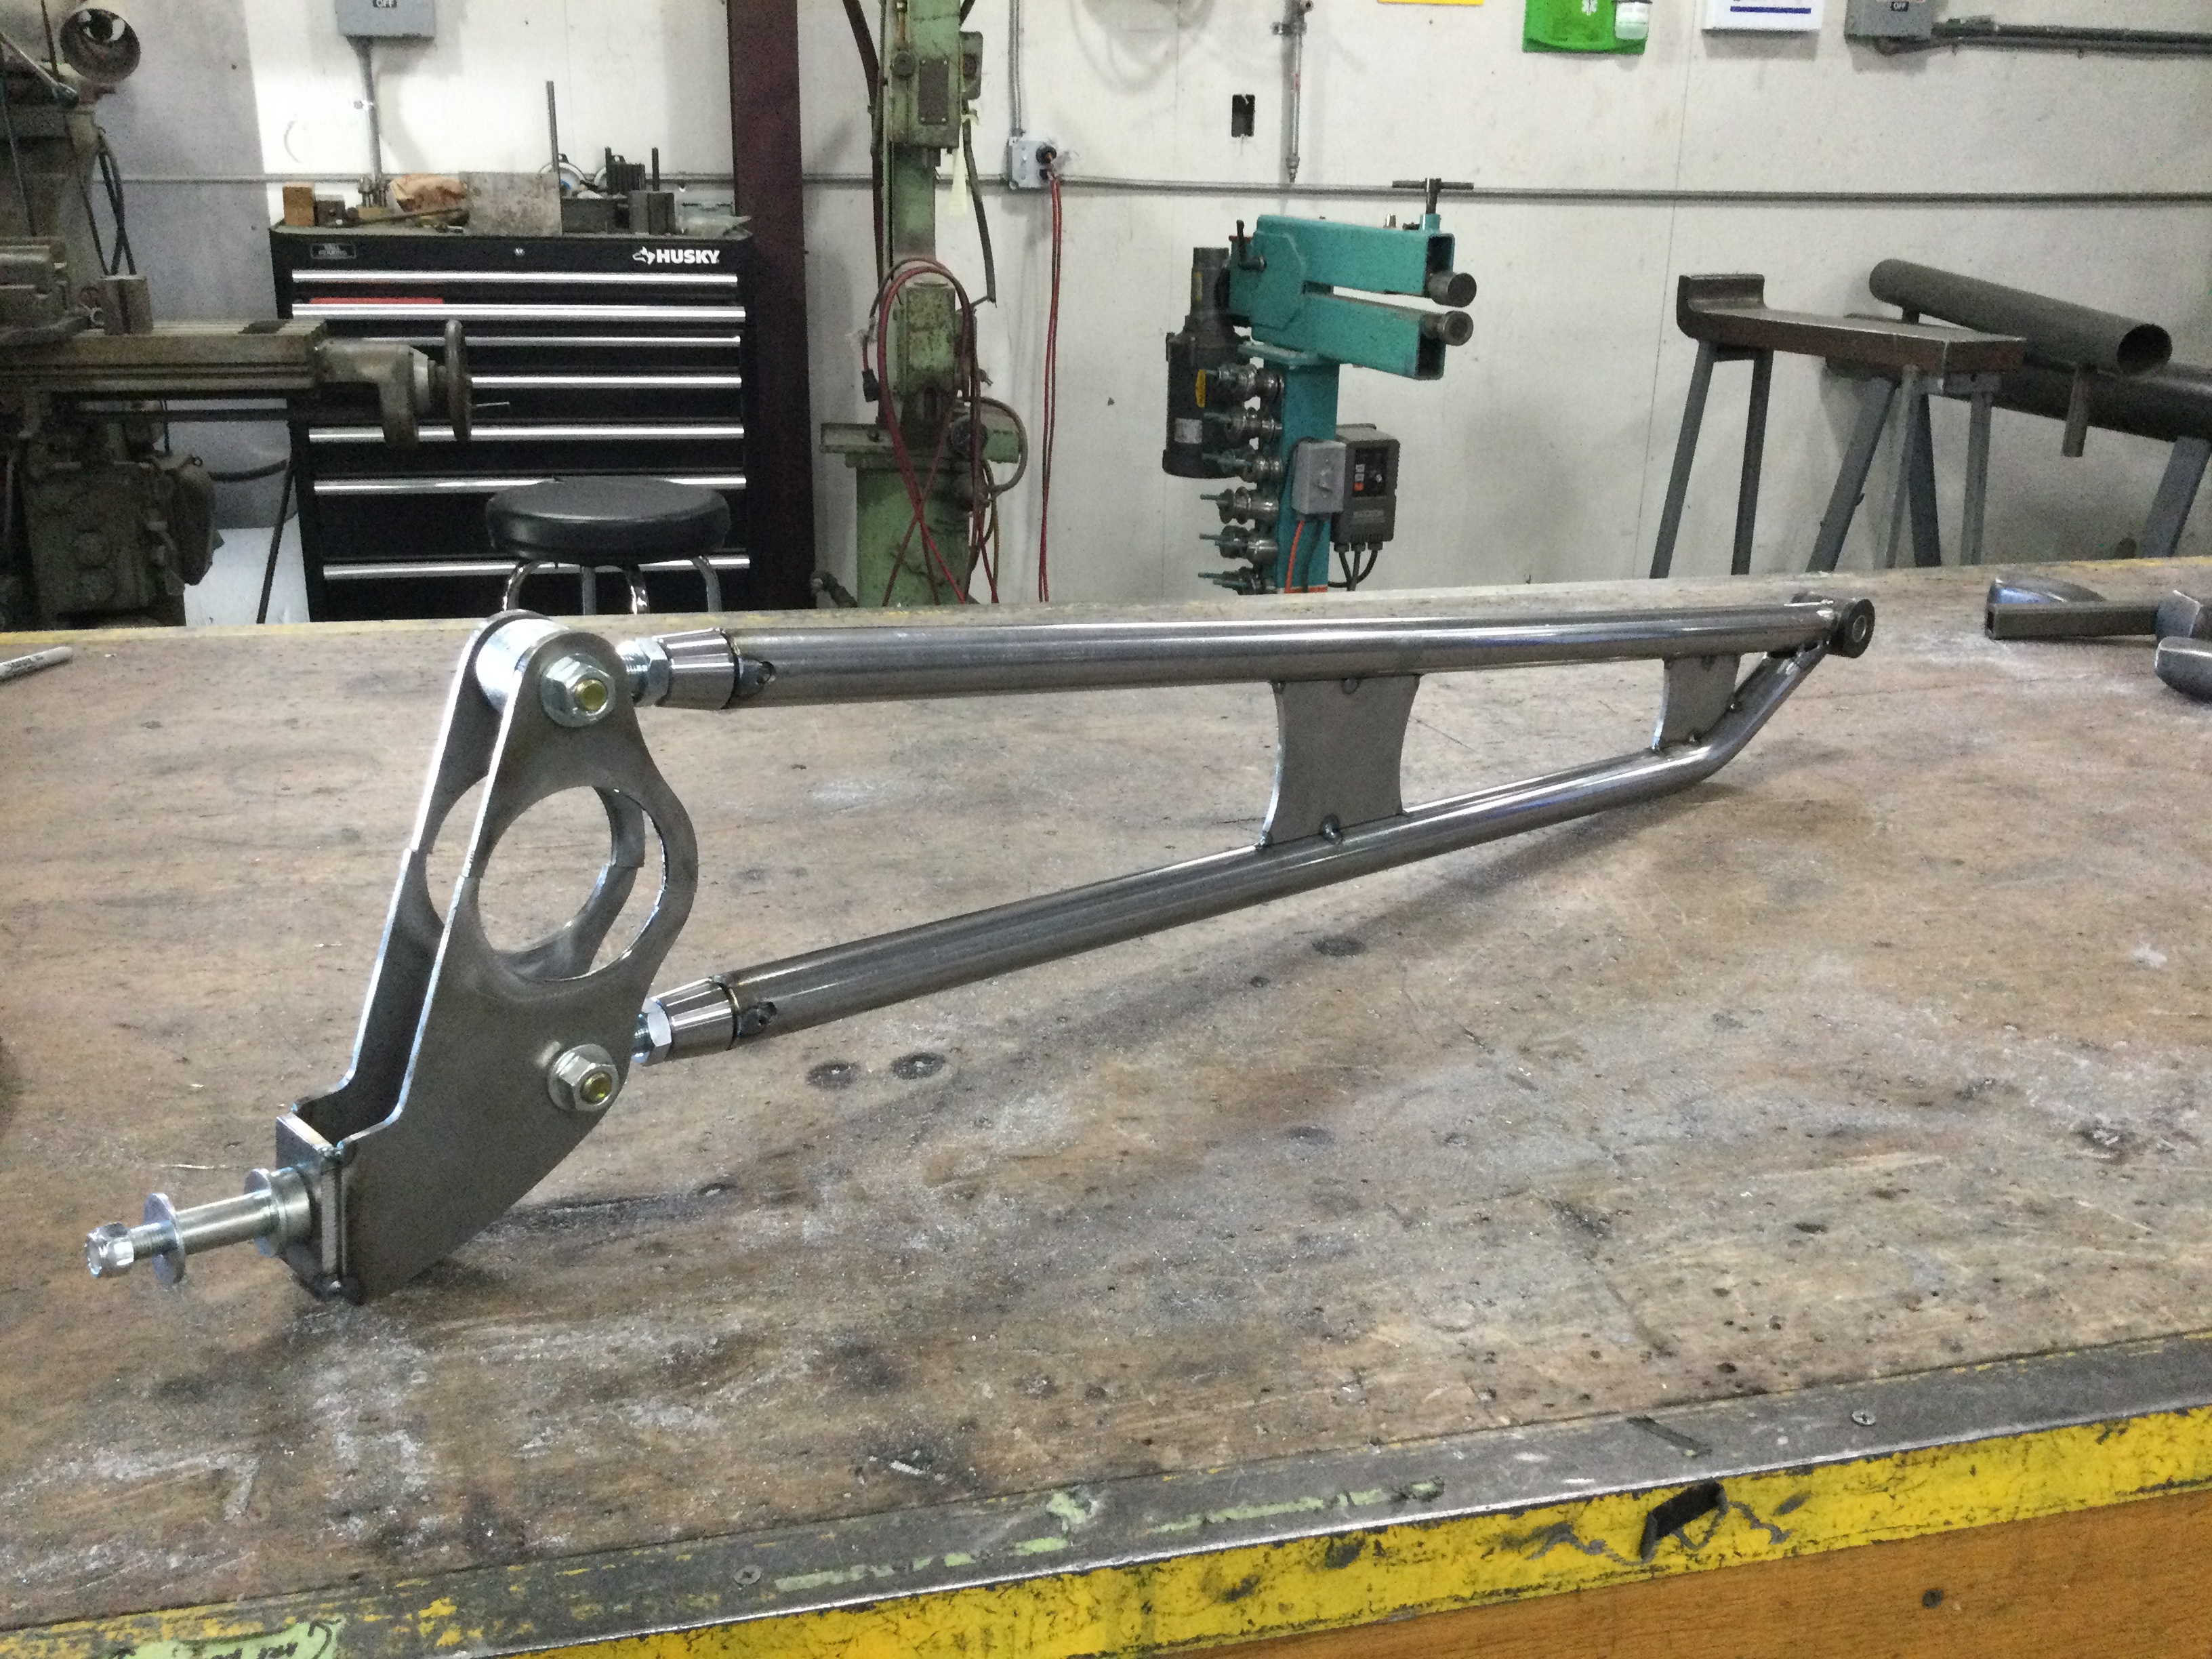 Designing components for the Willys Gasser